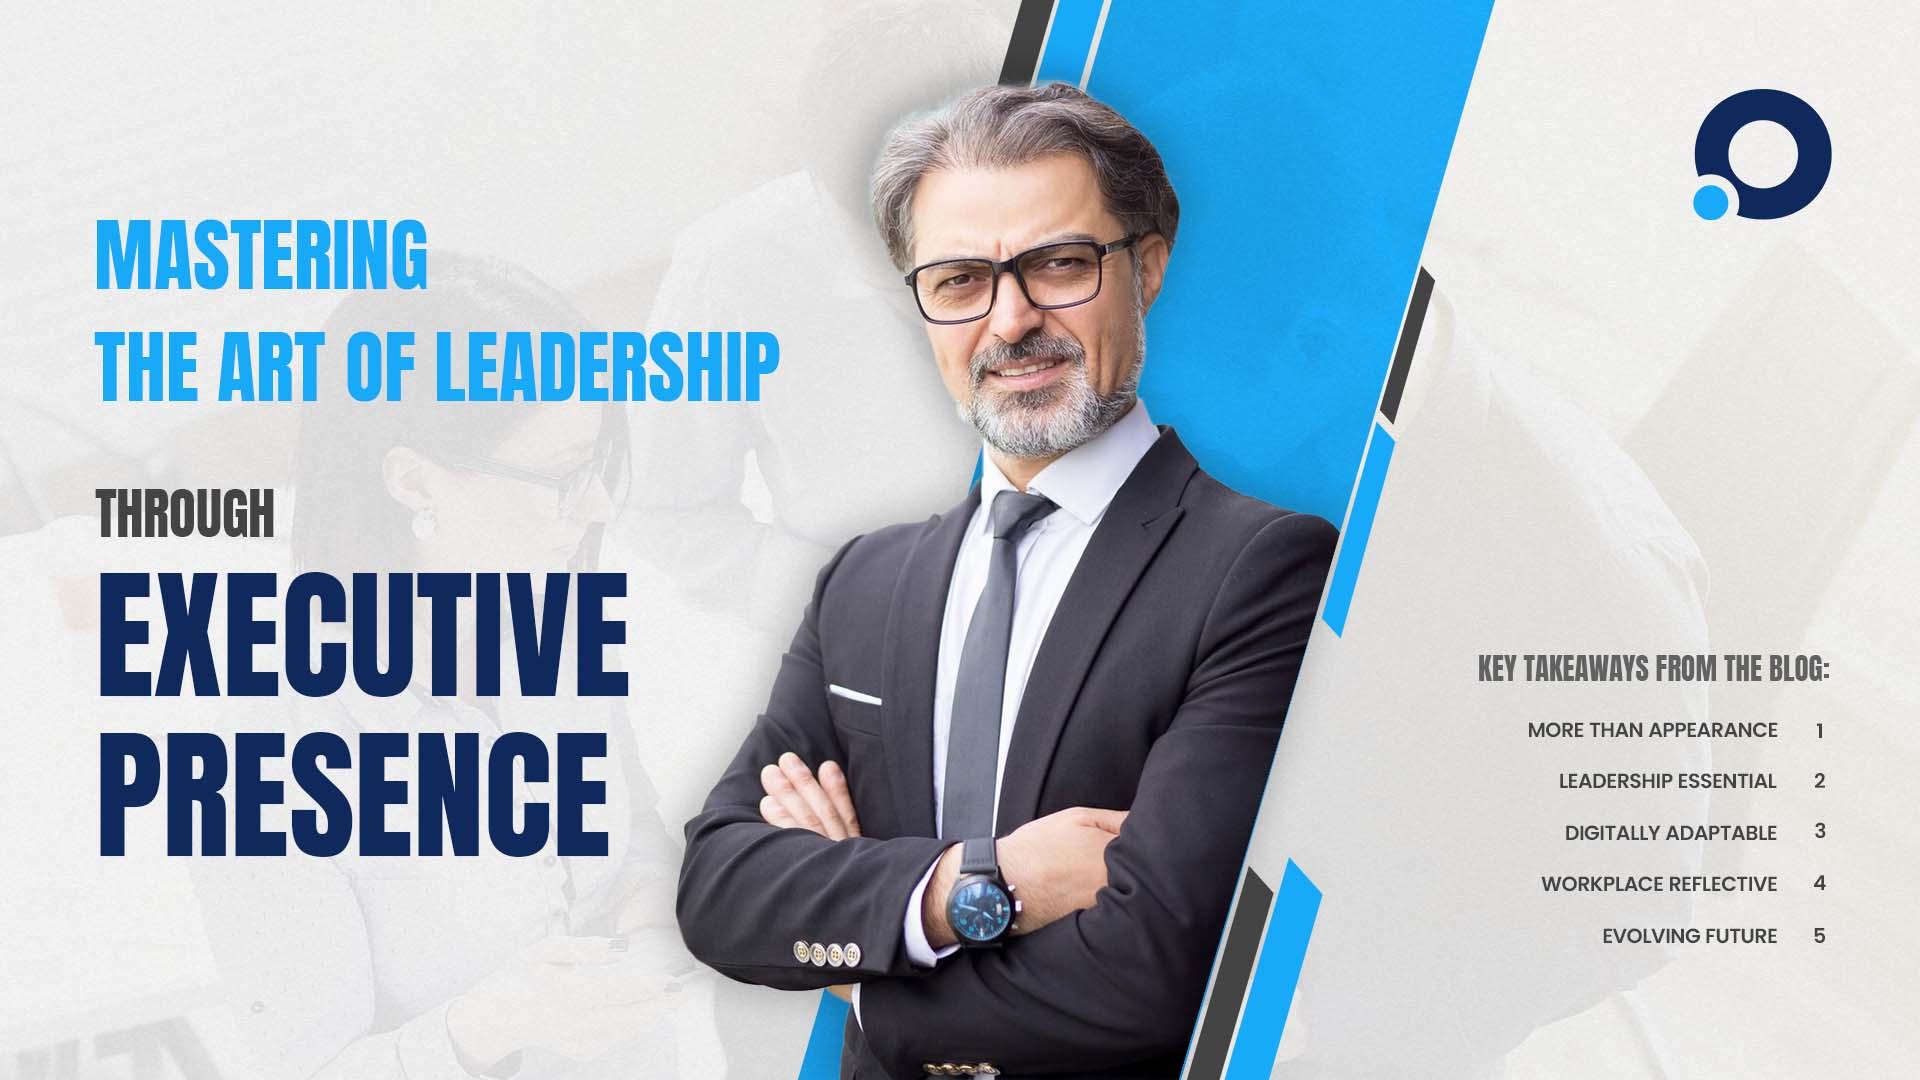 Executive presence is a combination of qualities that enable you to inspire confidence, command respect, and motivate others. It’s about how you articulate